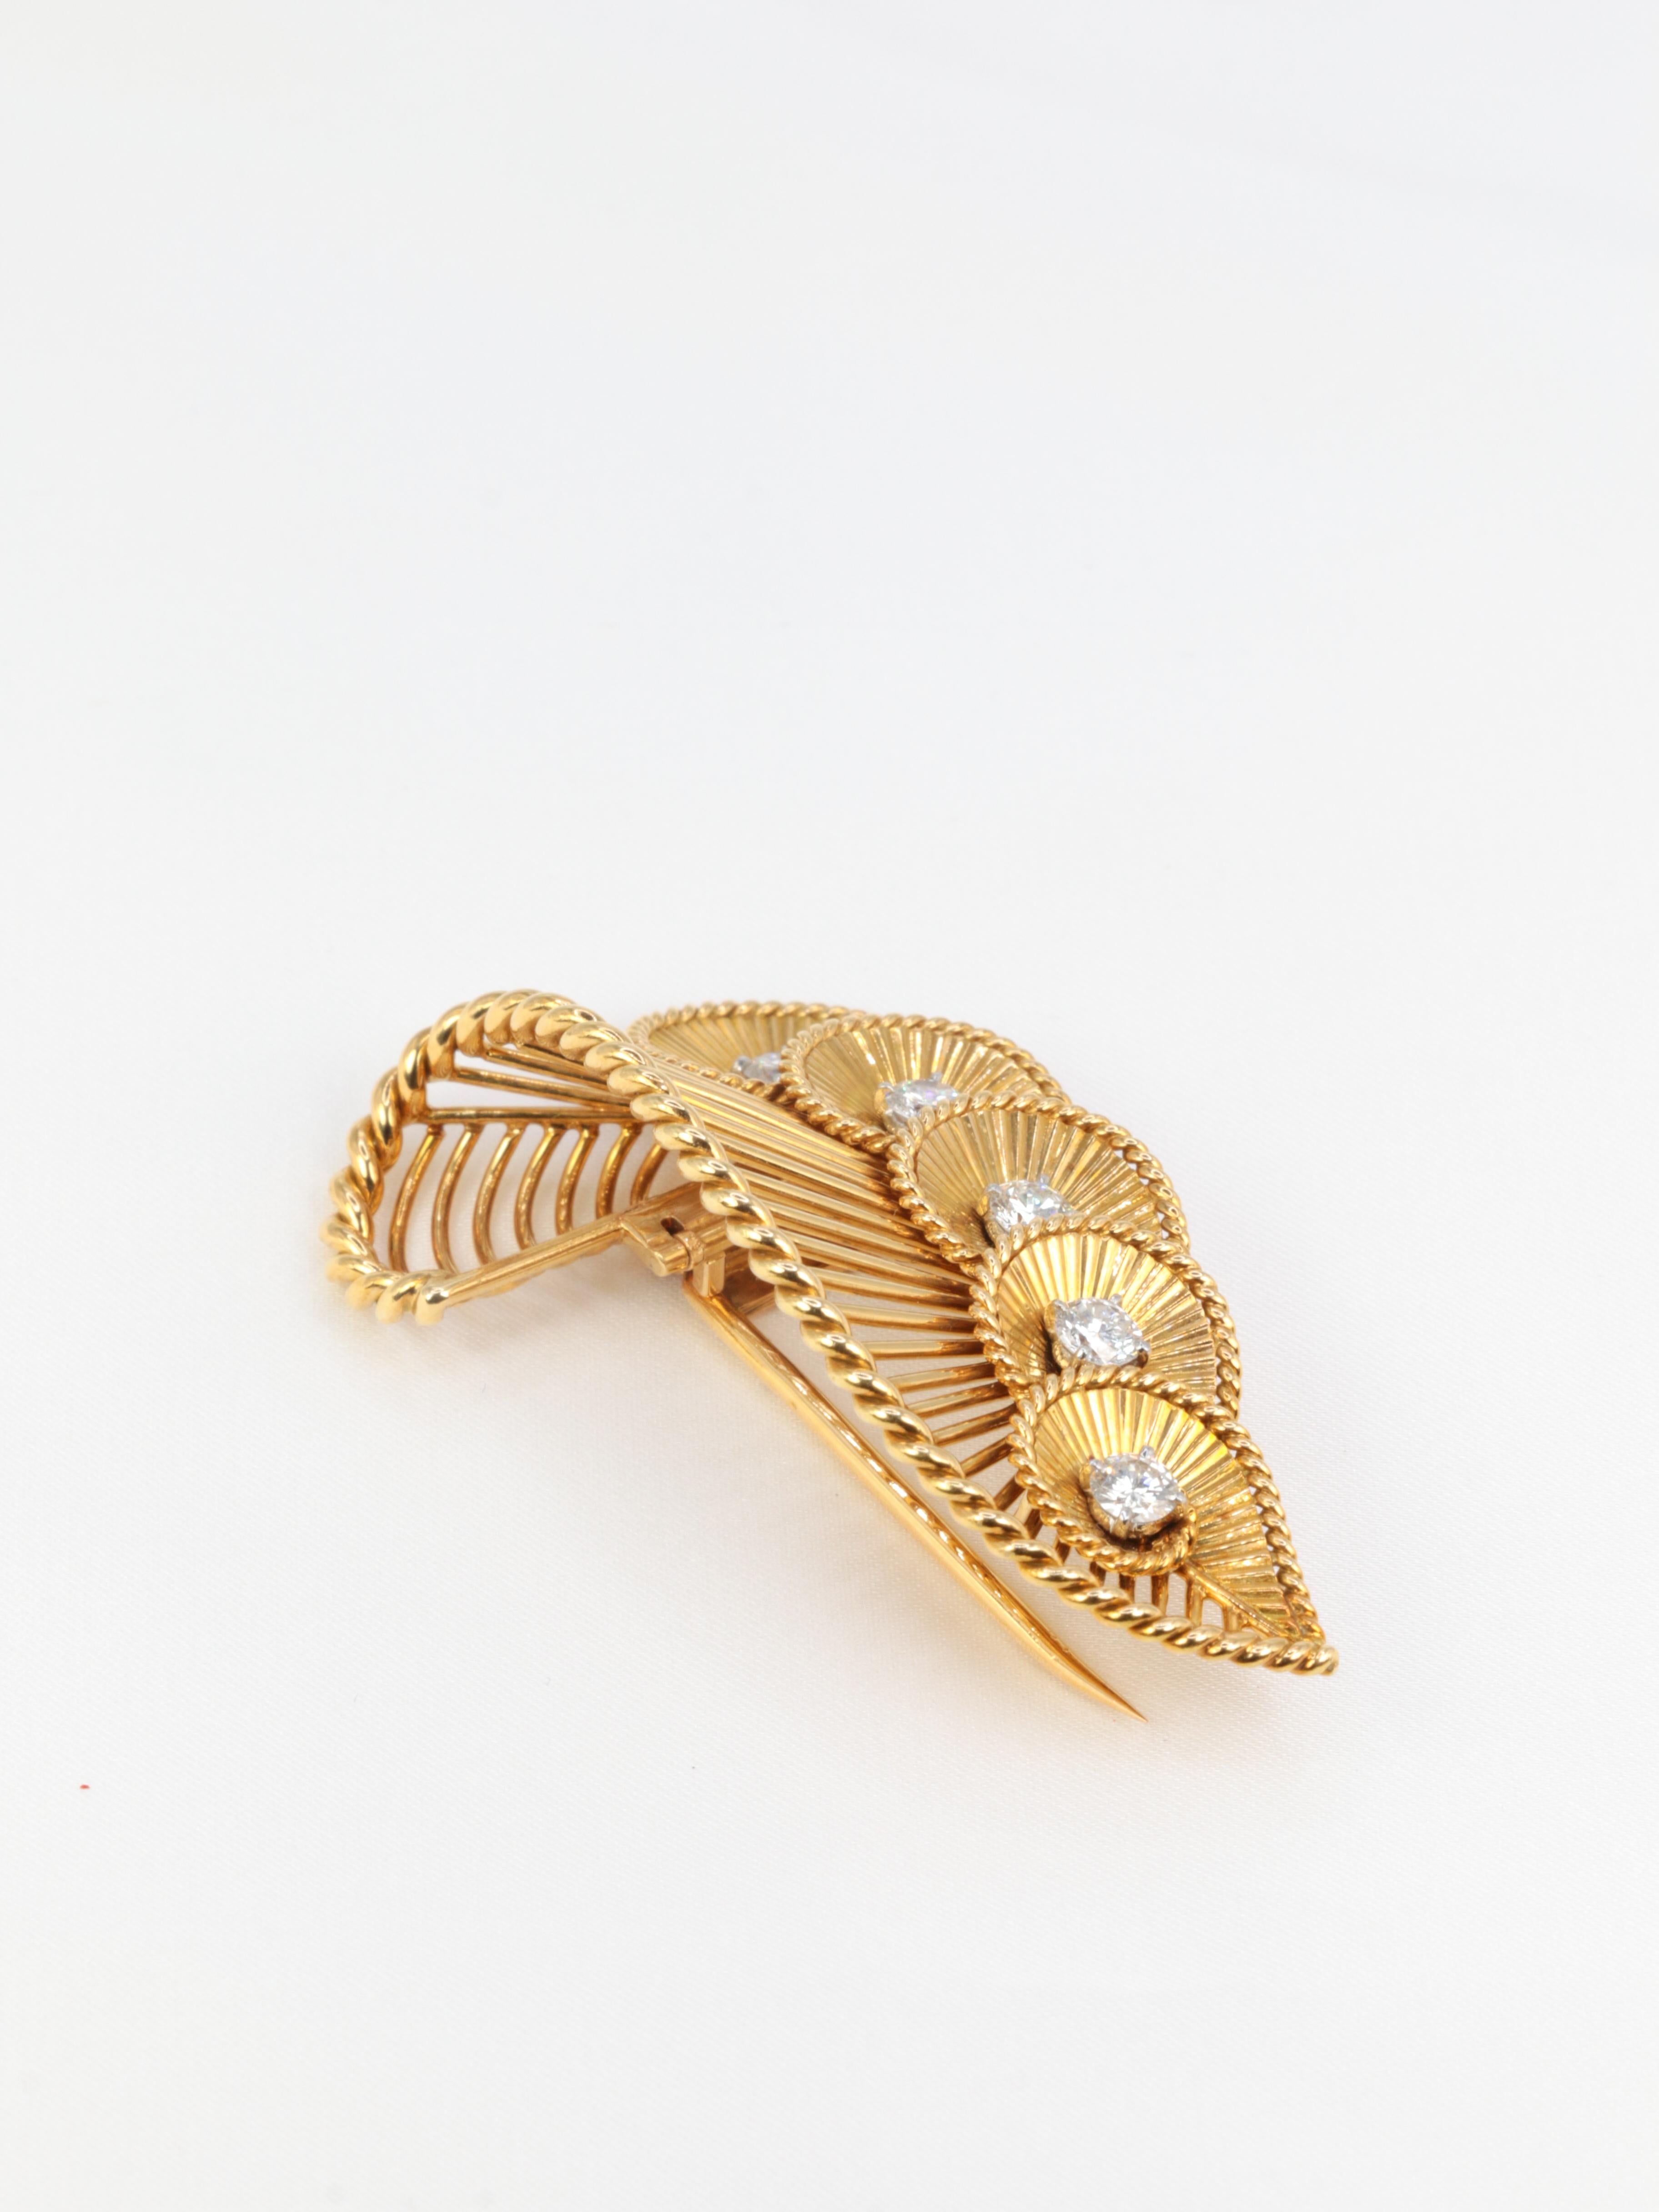 Women's or Men's Gold Vintage Cartier Shell Brooch with Diamonds